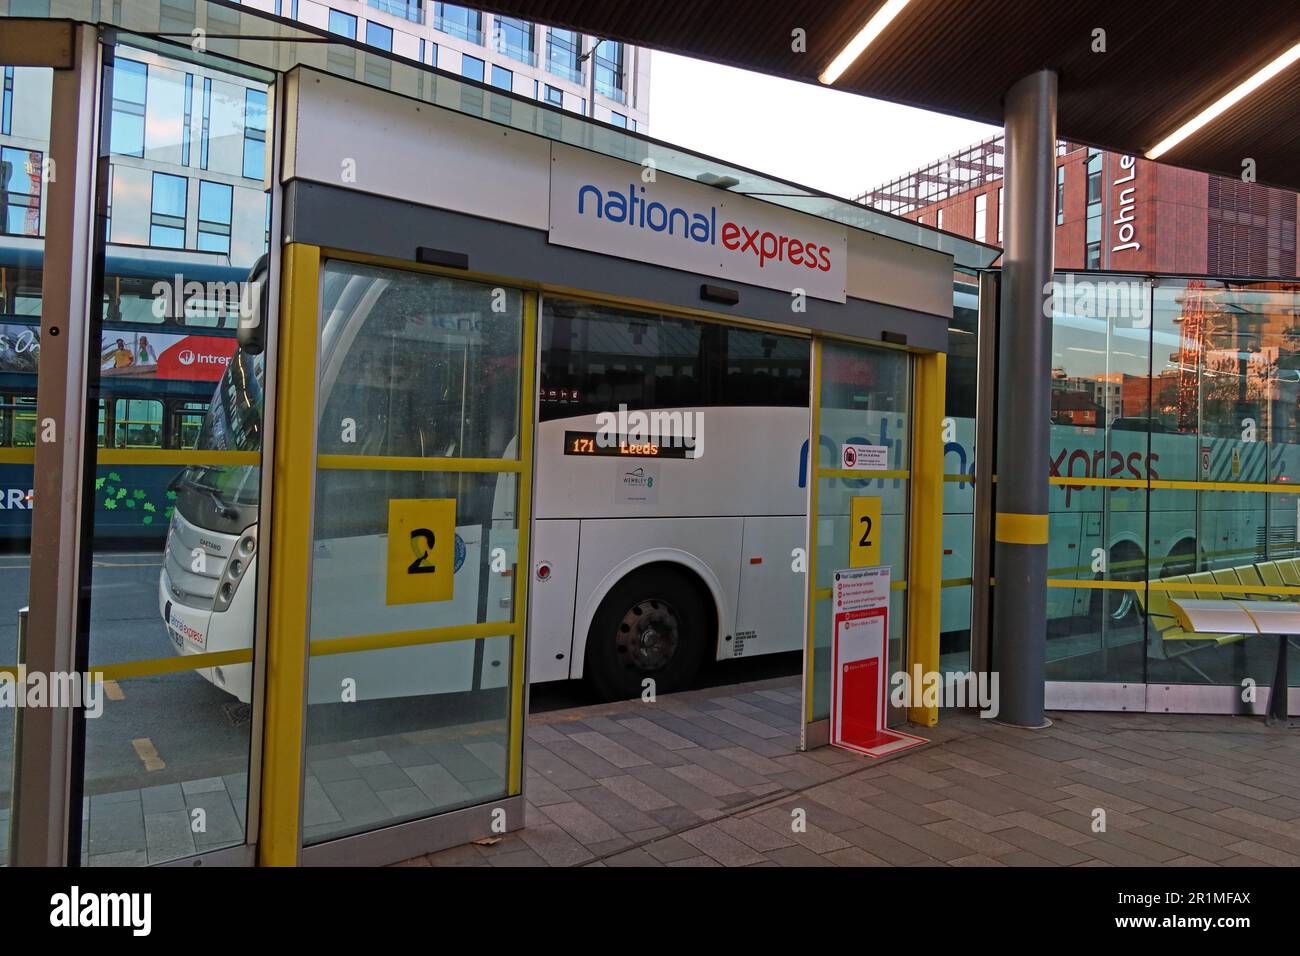 National Express inter-city bus services stand two, Leeds service, at Liverpool ONE bus station, Paradise St, Liverpool, Merseyside, England,L1 3EU Stock Photo